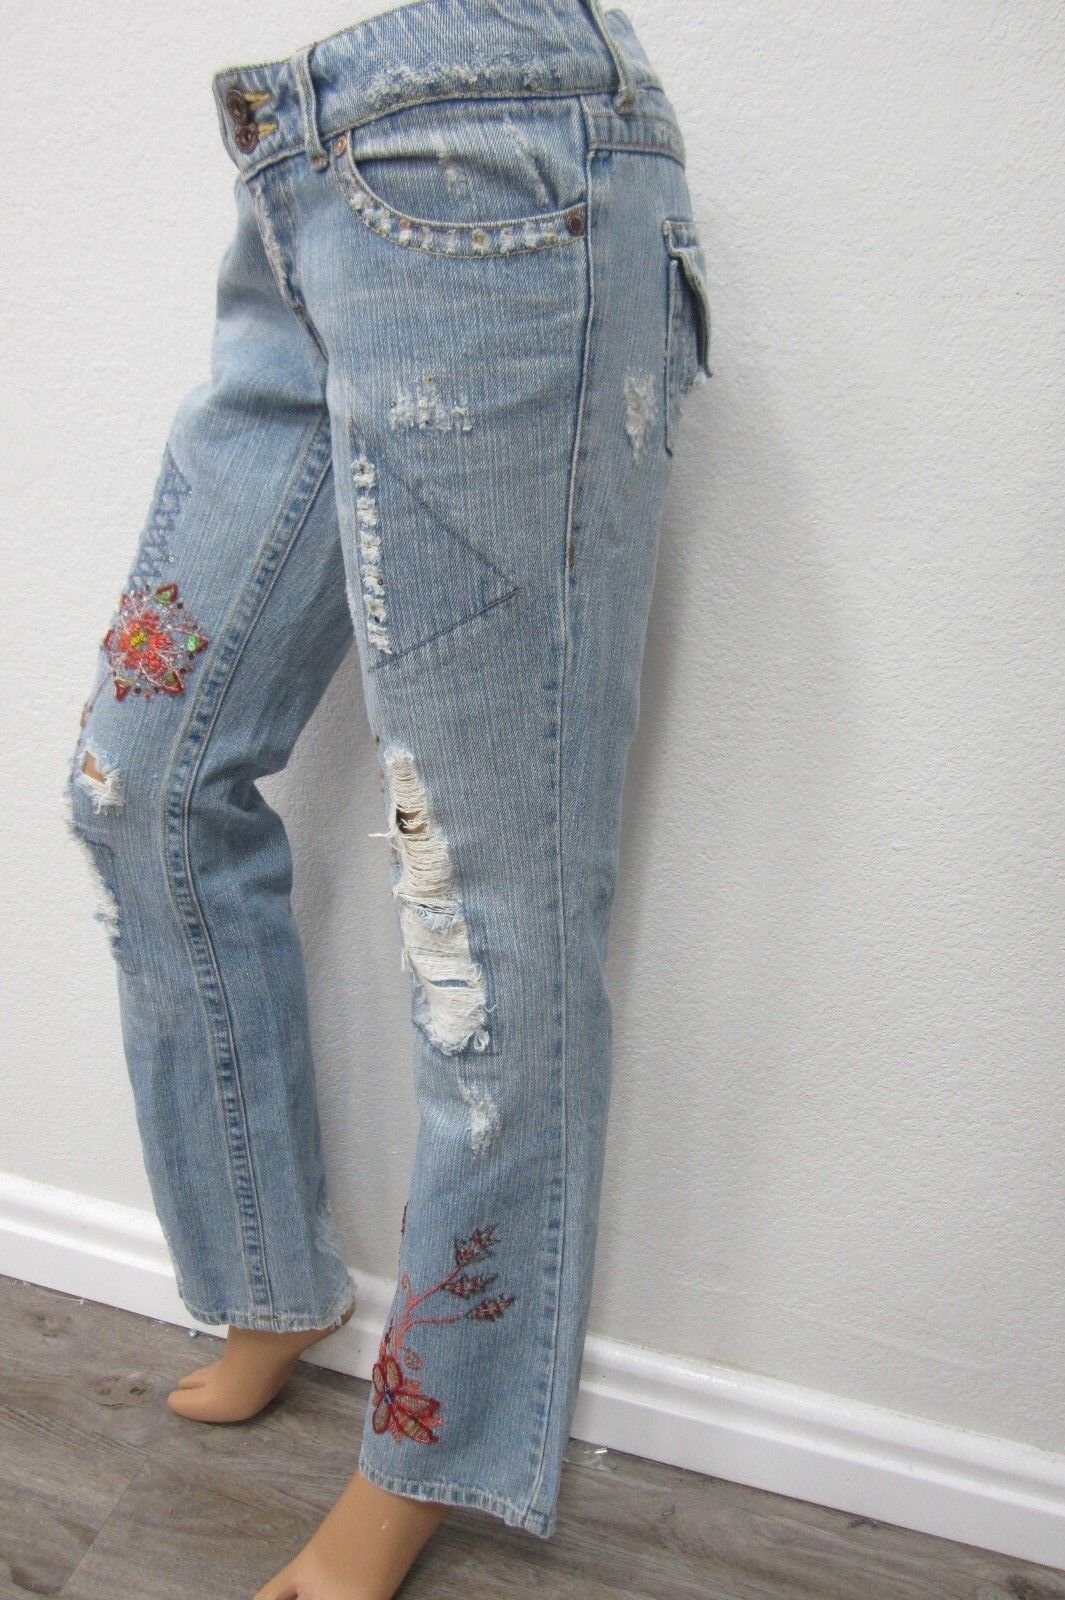 *VERY NICE*  Squeeze Denim Distressed Floral Embroidered  Blue Jeans Sz 3/4 x 31